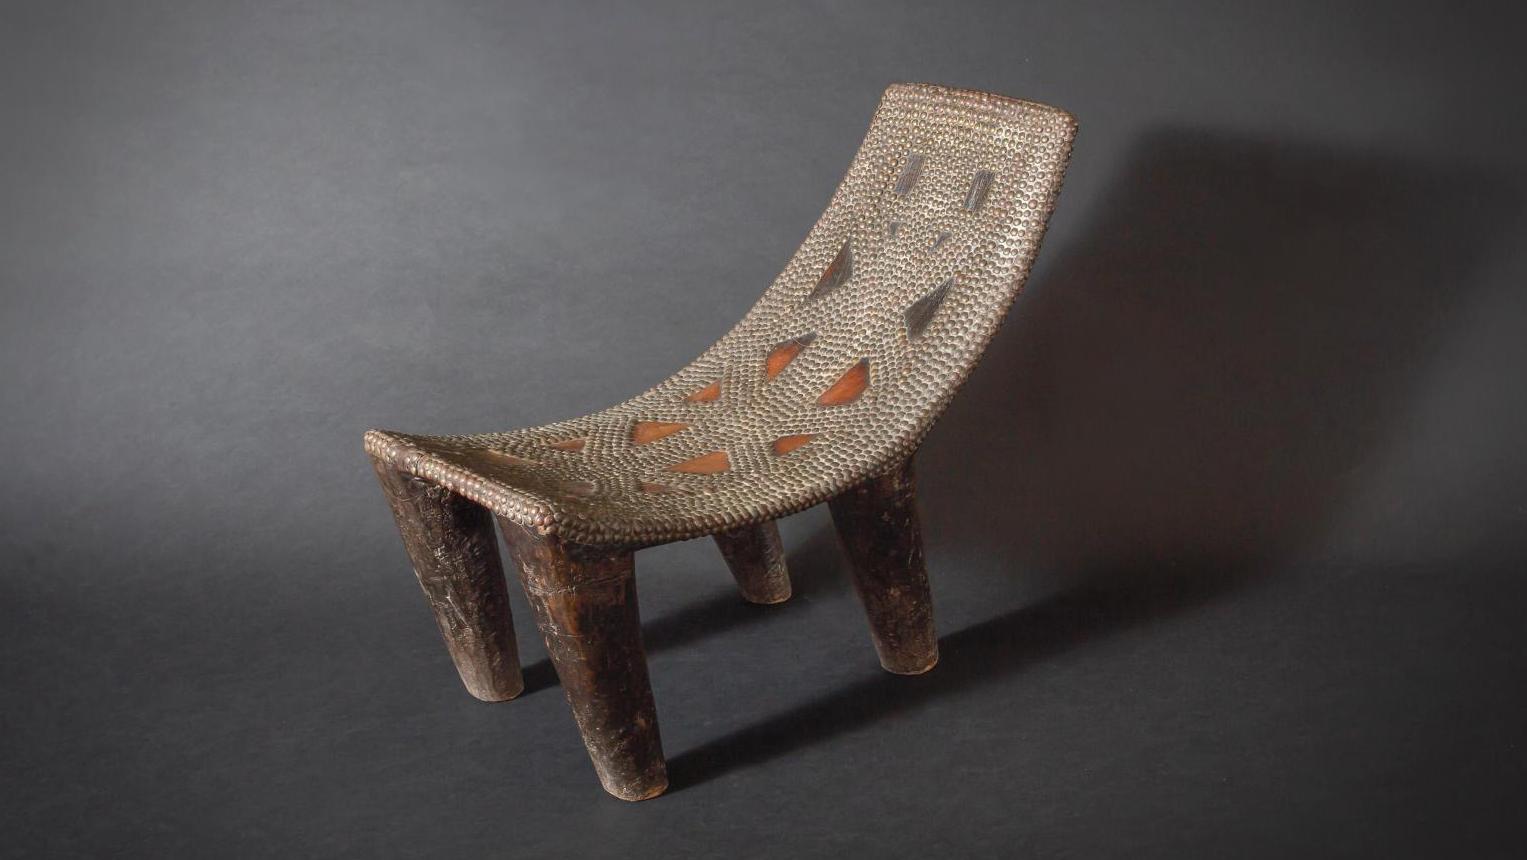 Congo, Ngombe chair, studded seat, worn patina on the seat and black lacquered patina on the legs, l. 60 cm/23.62 in, seat h. 22 cm/8.66 in, backrest h. 47 cm/18.50 in. Estimate: €8,000/15,000